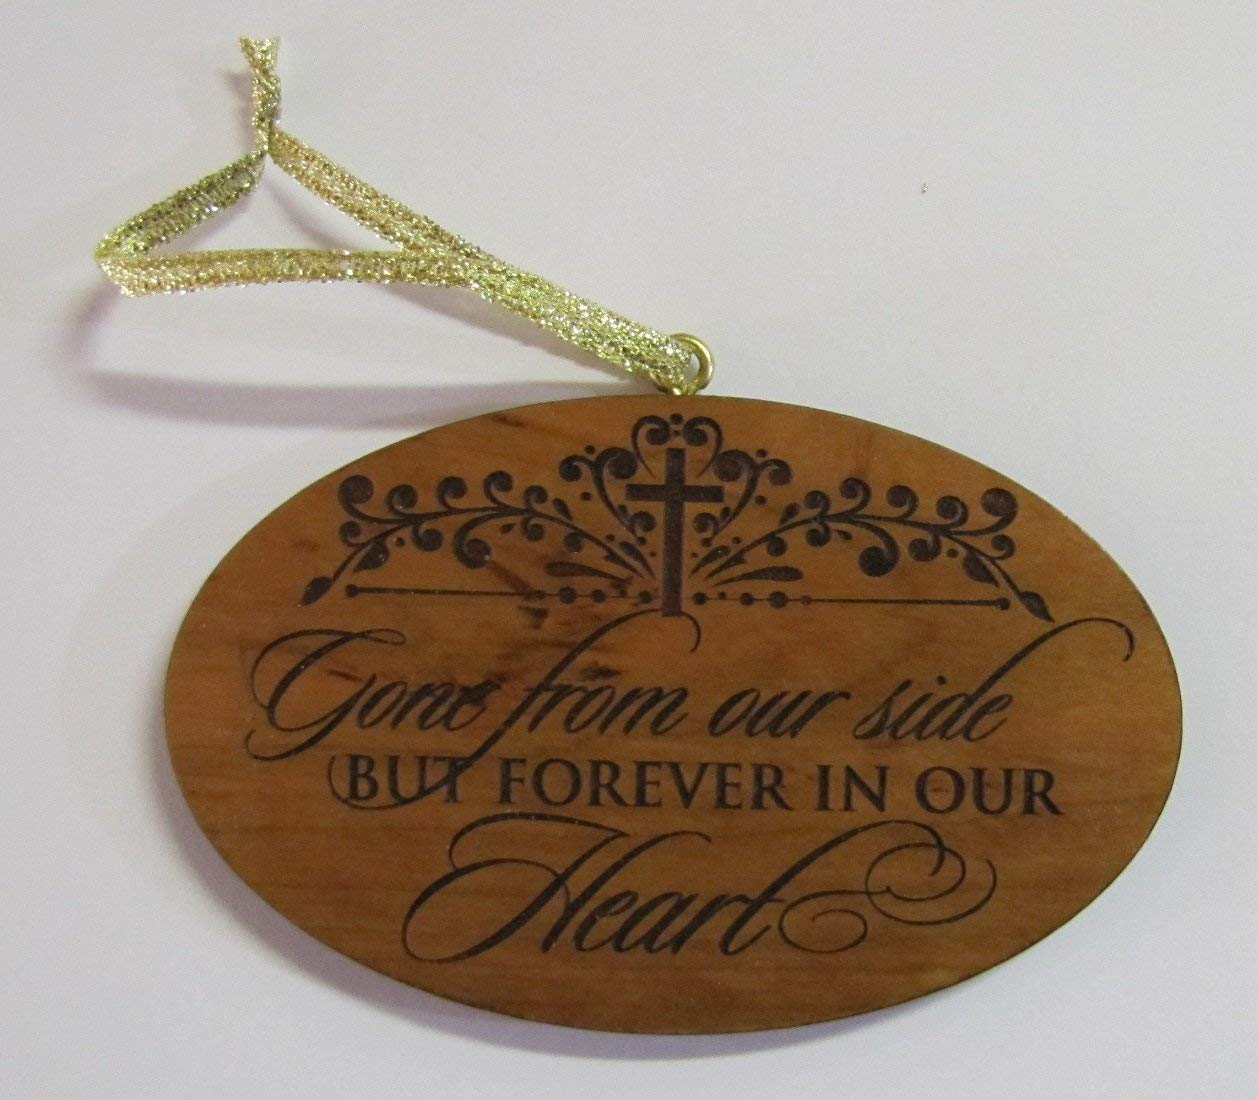 Engraved Memorial Ornament for Loss of Loved One - Gone From Our Side but Forever in Our Heart - LifeSong Milestones